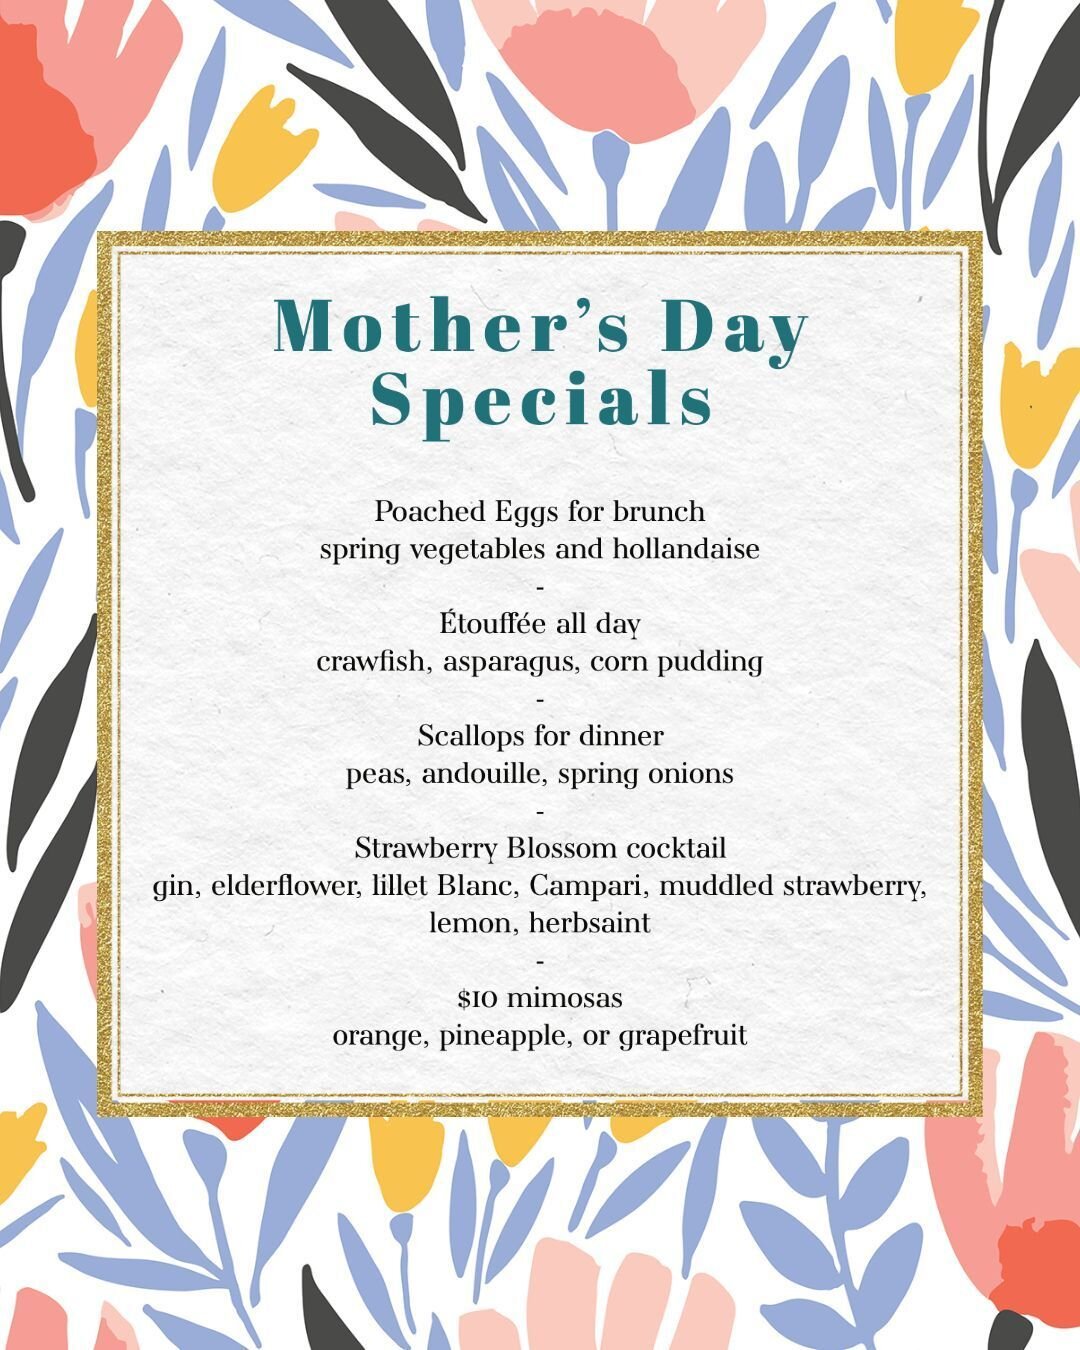 $10 mimosa special for Moms on Sunday, May 14! 🥂 Check out our other Mother's Day specials and save your table ahead of time. Link in bio.